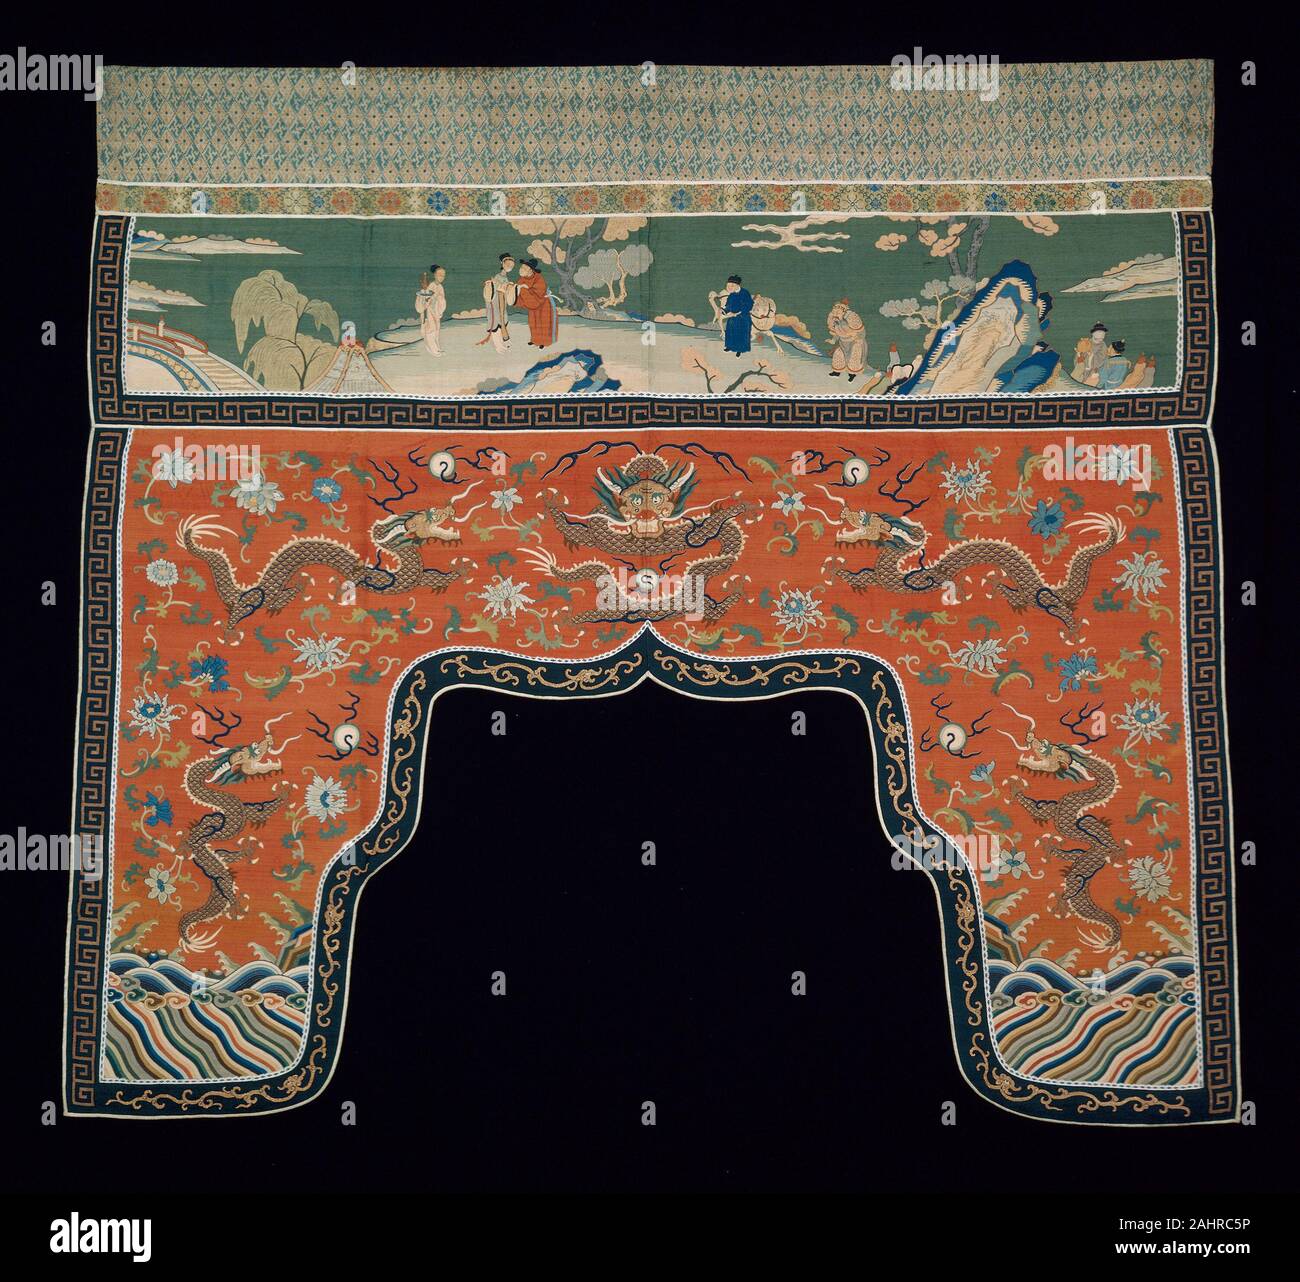 Valance. 1799. China. Top cotton, plain weave; block printed; narrow band silk, warp-float faced 5 1 satin weave with weft-float faced 1 2 'S' twill interlacings of secondary binding warps and supplementary patterning wefts; upper and lower panels silk and gold-leaf-over-lacquered-paper-strip-wrapped silk, slit tapestry weave with interlaced outlining wefts; painted details; outer bands silk and gold-leaf-over-lacquered-paper-strip-wrapped silk, dovetailed tapestry weave; ribbon silk, plain weave with supplementary patterning warps; outer edging silk, warp-float faced 4 1 satin weave; lined wi Stock Photo